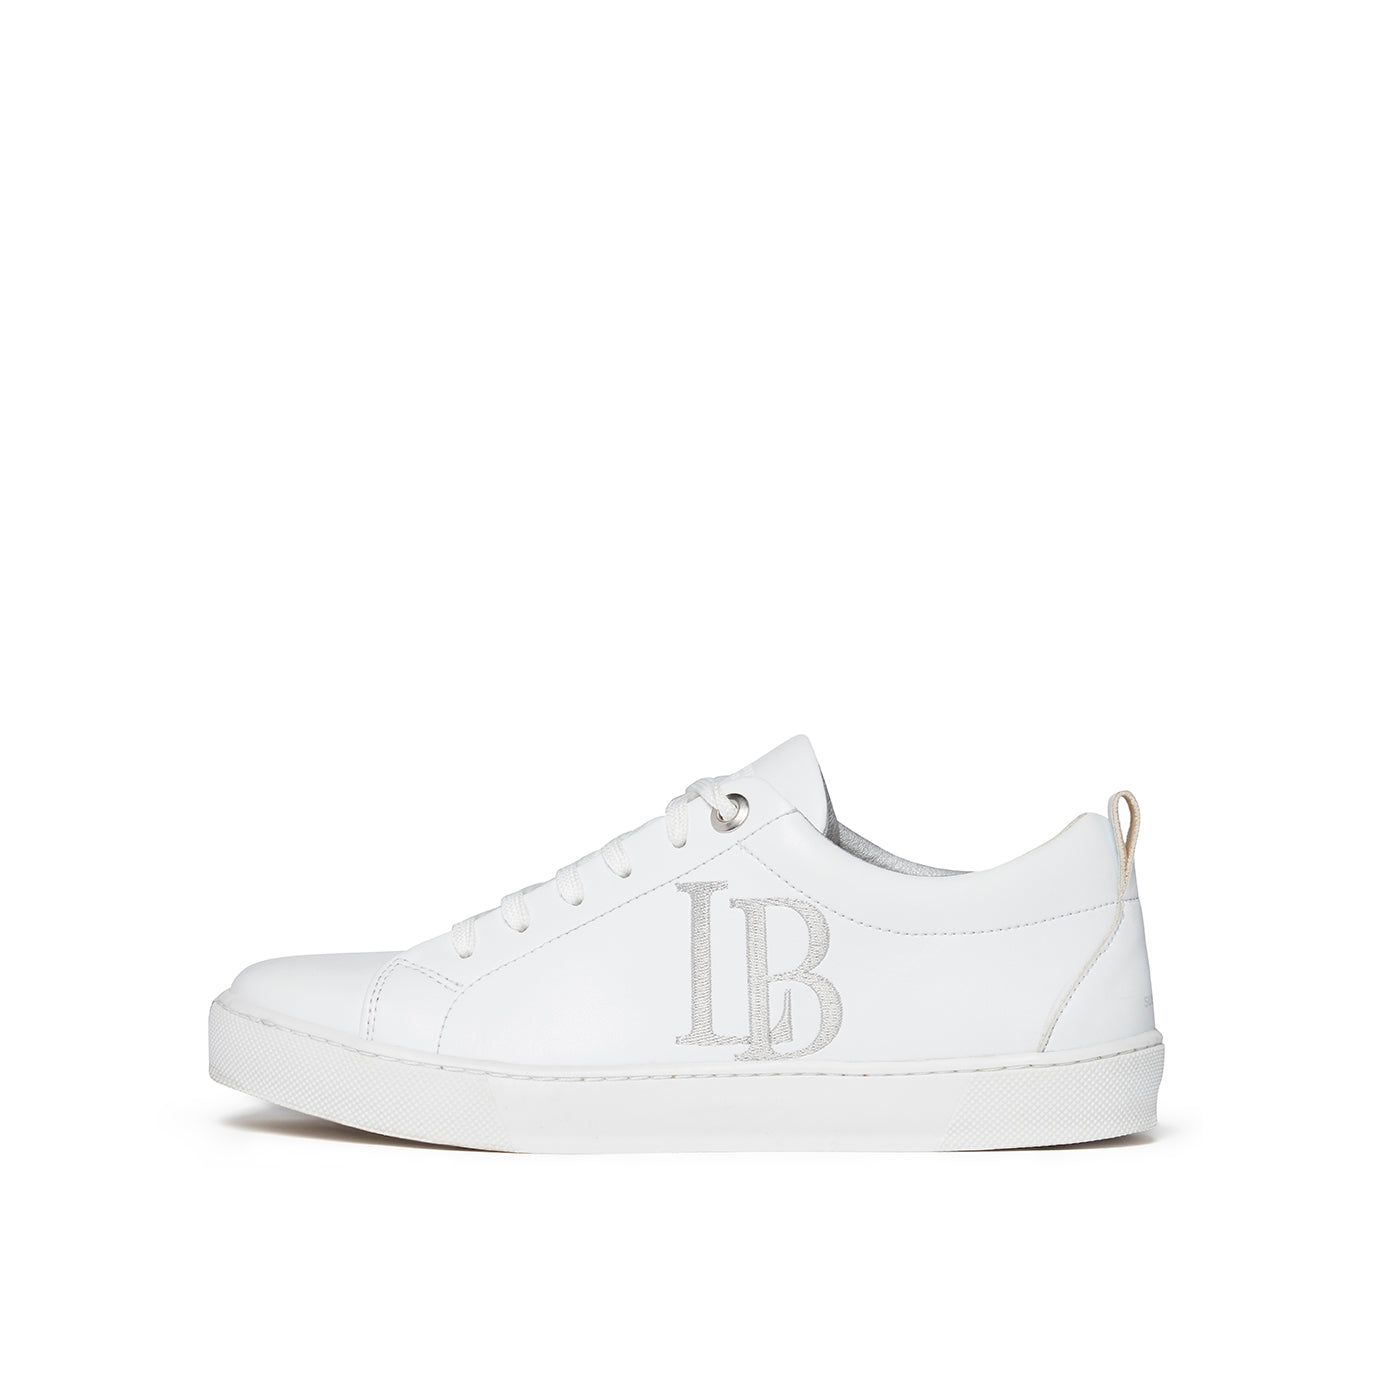 LB White Apple Leather Sneakers Women - Scarvesnthangs